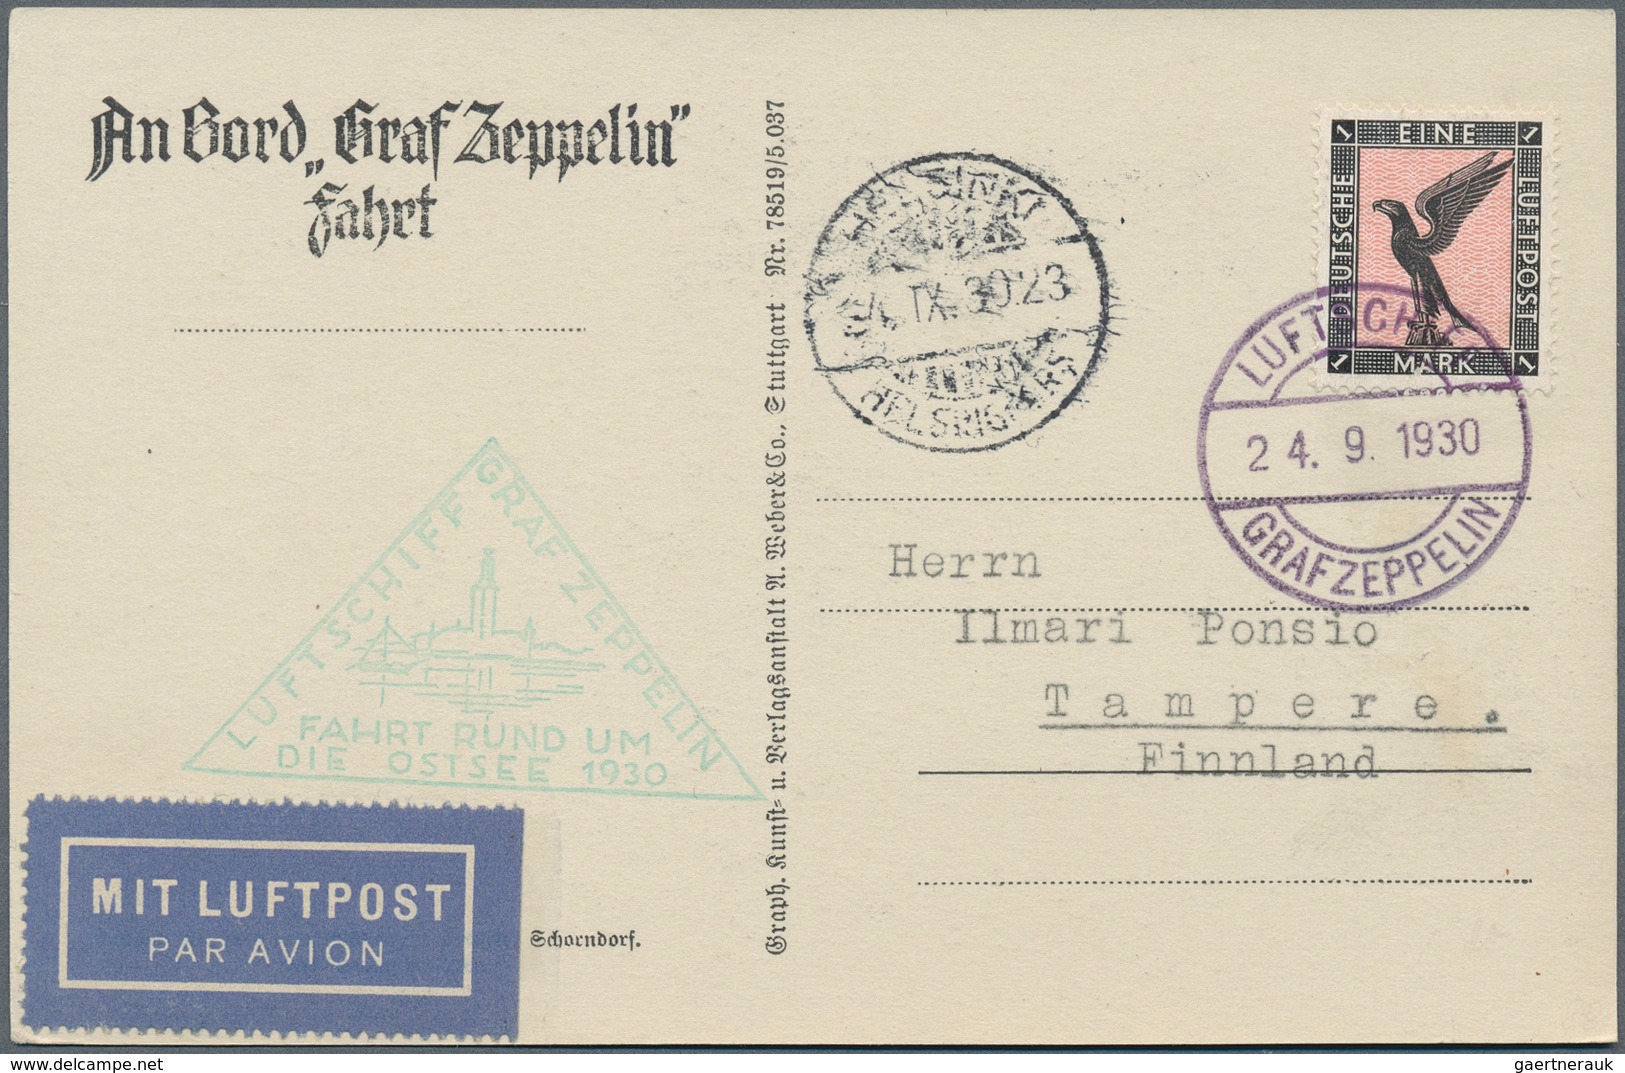 Ansichtskarten: Motive / Thematics: ZEPPELIN: Over 140 Zeppelin postcards, mostly Real Photos with t